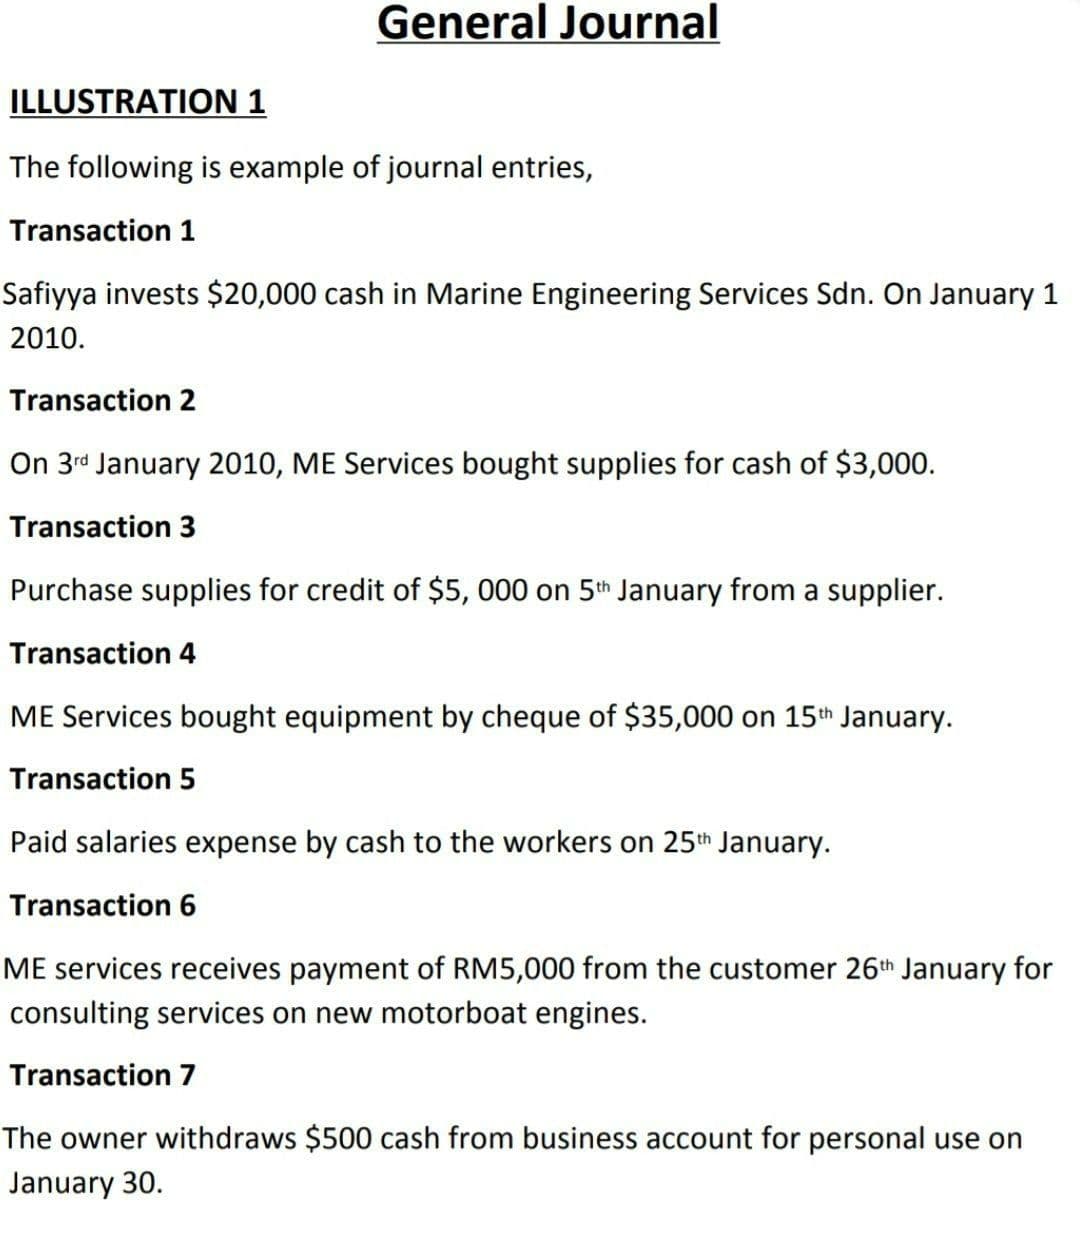 General Journal
ILLUSTRATION 1
The following is example of journal entries,
Transaction 1
Safiyya invests $20,000 cash in Marine Engineering Services Sdn. On January 1
2010.
Transaction 2
On 3rd January 2010, ME Services bought supplies for cash of $3,000.
Transaction 3
Purchase supplies for credit of $5, 000 on 5th January from a supplier.
Transaction 4
ME Services bought equipment by cheque of $35,000 on 15th January.
Transaction 5
Paid salaries expense by cash to the workers on 25th January.
Transaction 6
ME services receives payment of RM5,000 from the customer 26th January for
consulting services on new motorboat engines.
Transaction 7
The owner withdraws $500 cash from business account for personal use on
January 30.
